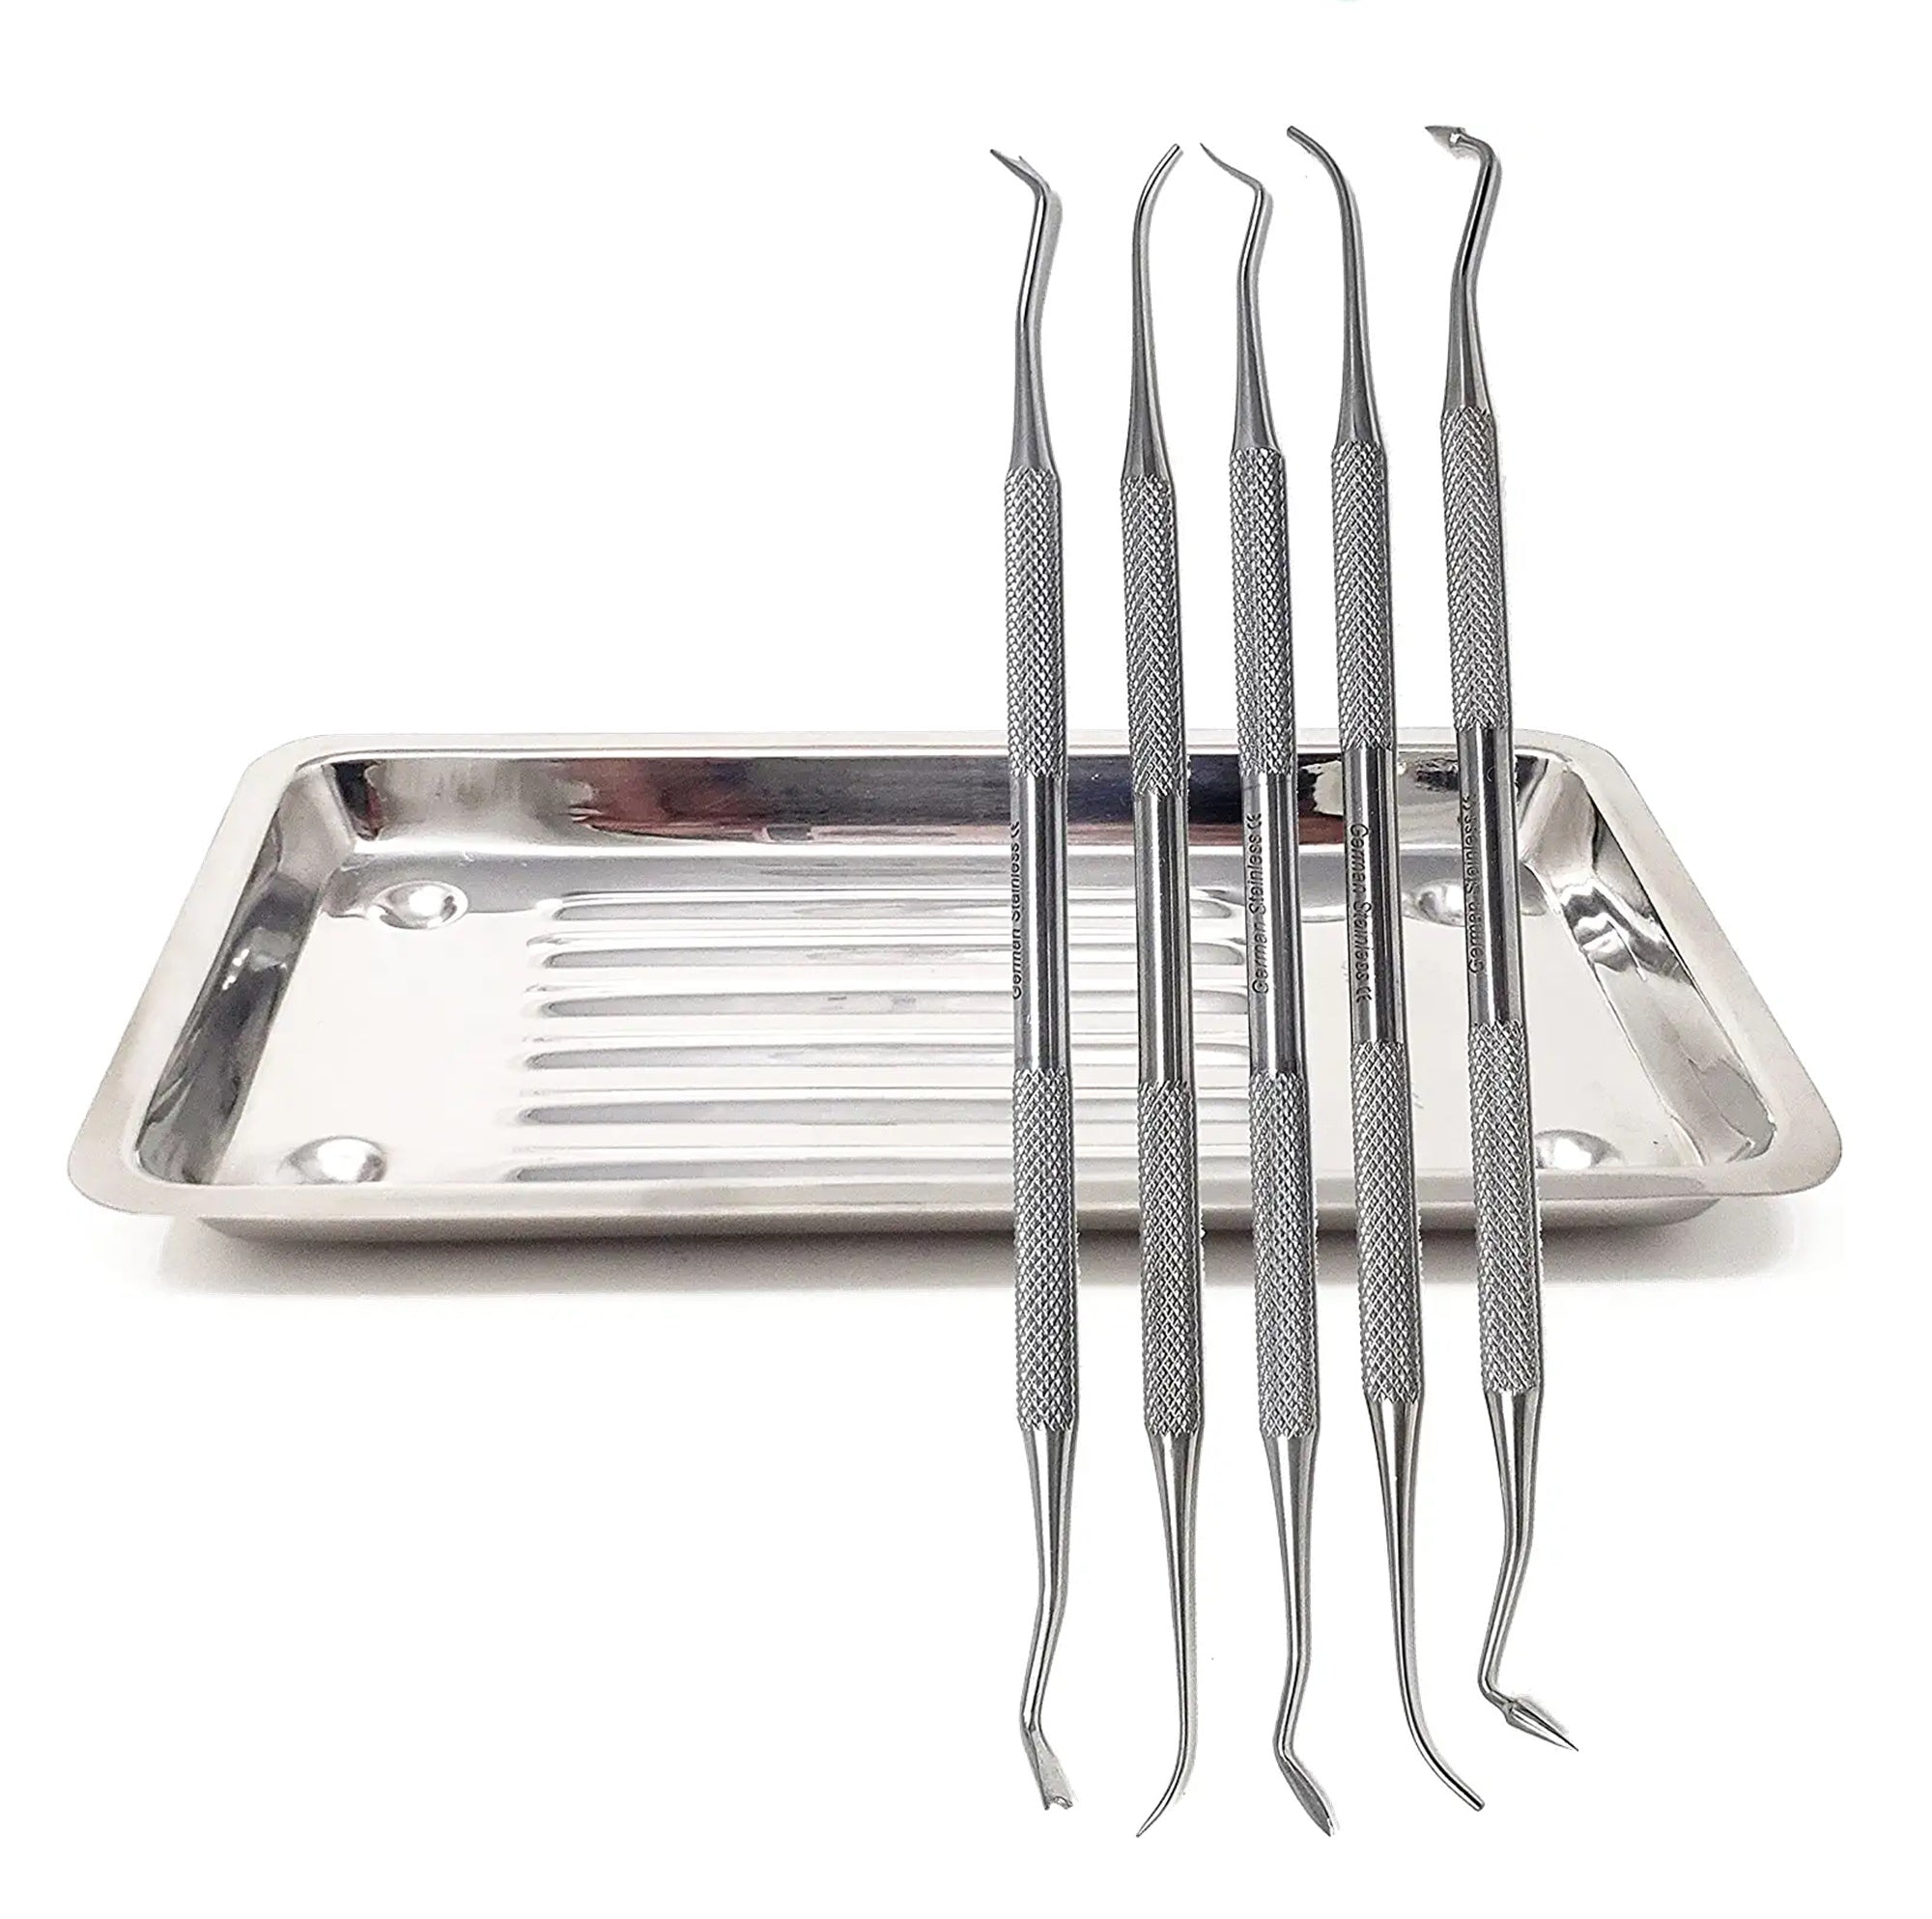 10Pcs/ Set New Stainless Steel Wax Carving Dentist Surgical Dental